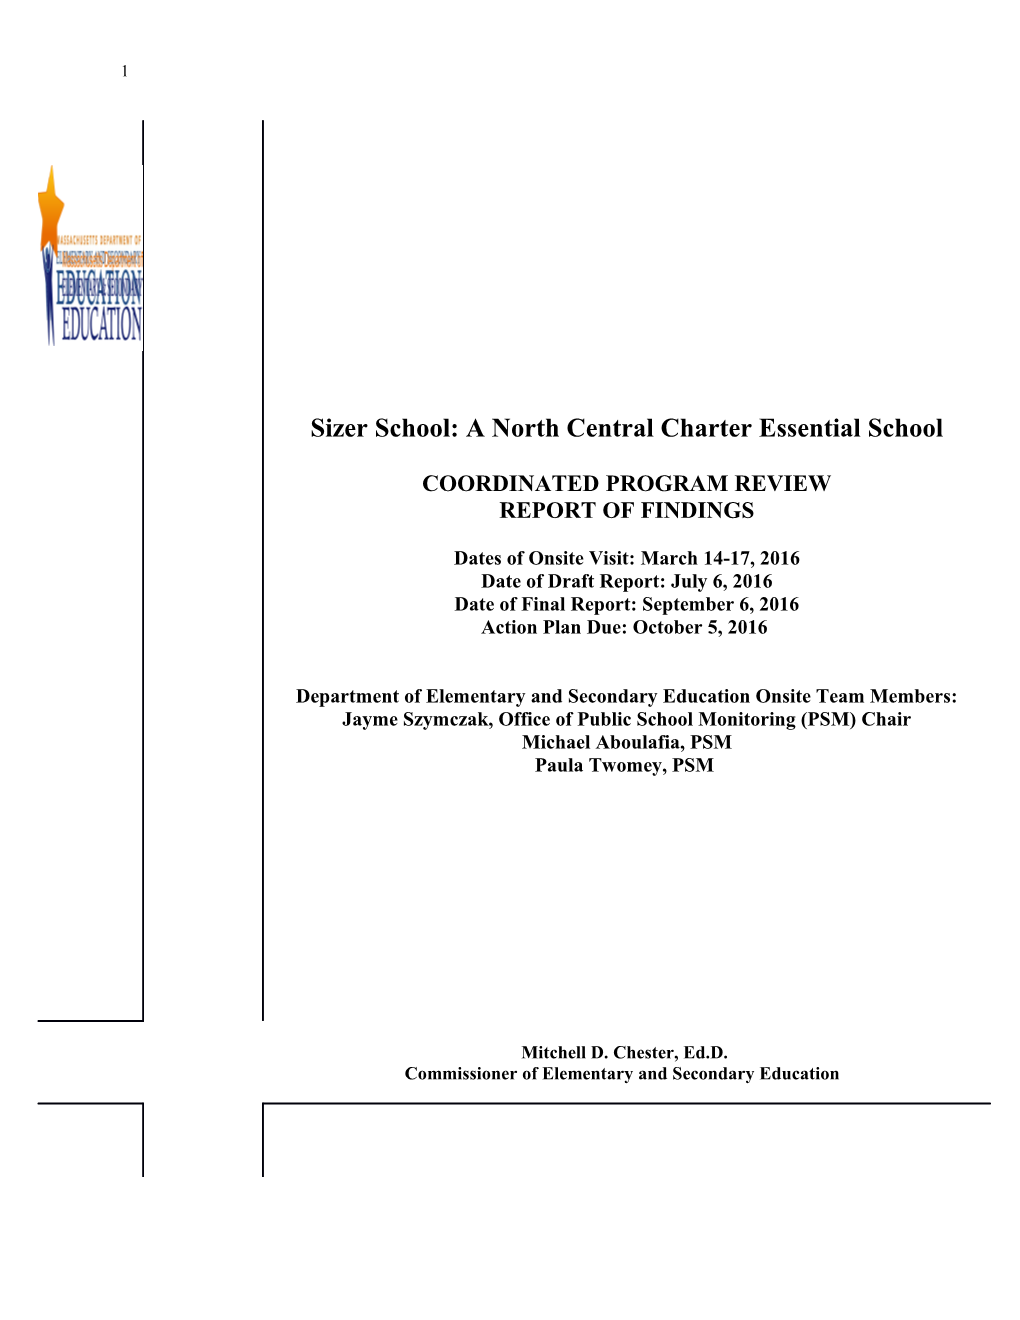 Sizer School - North Central Charter School CPR Final Report 2016